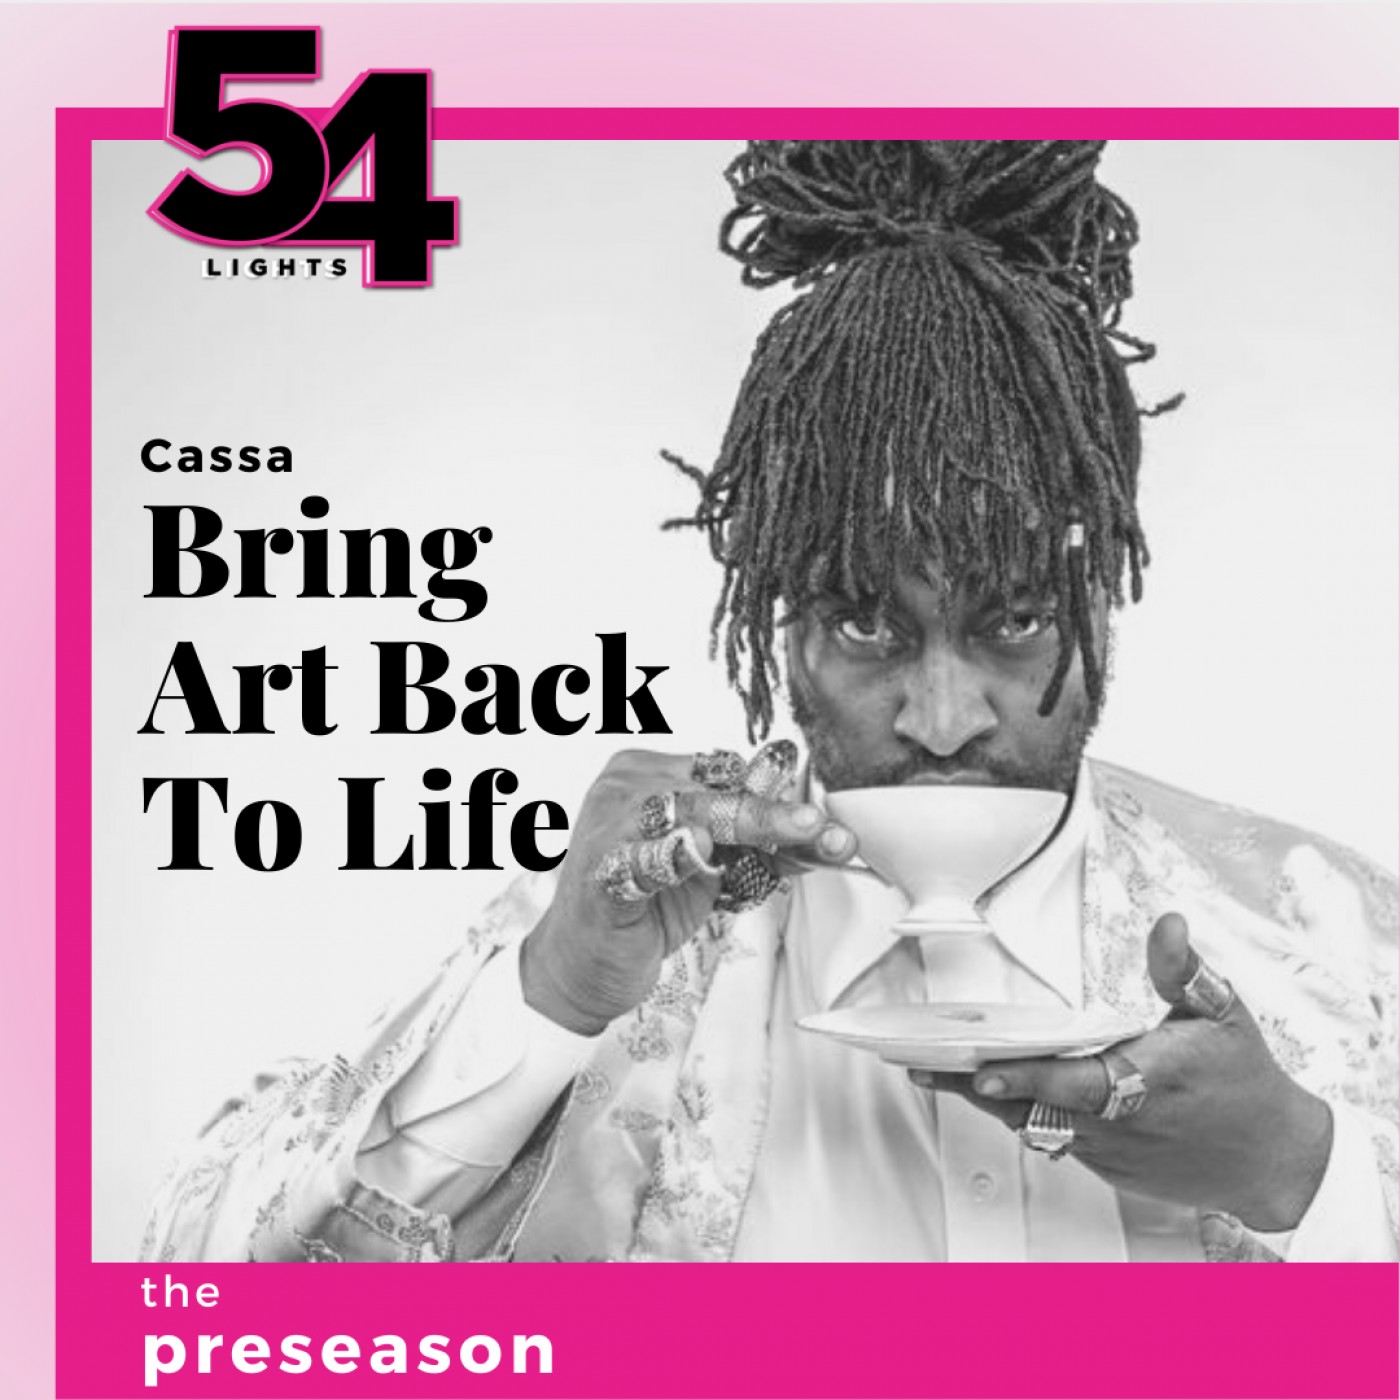 Bring Art Back To Life